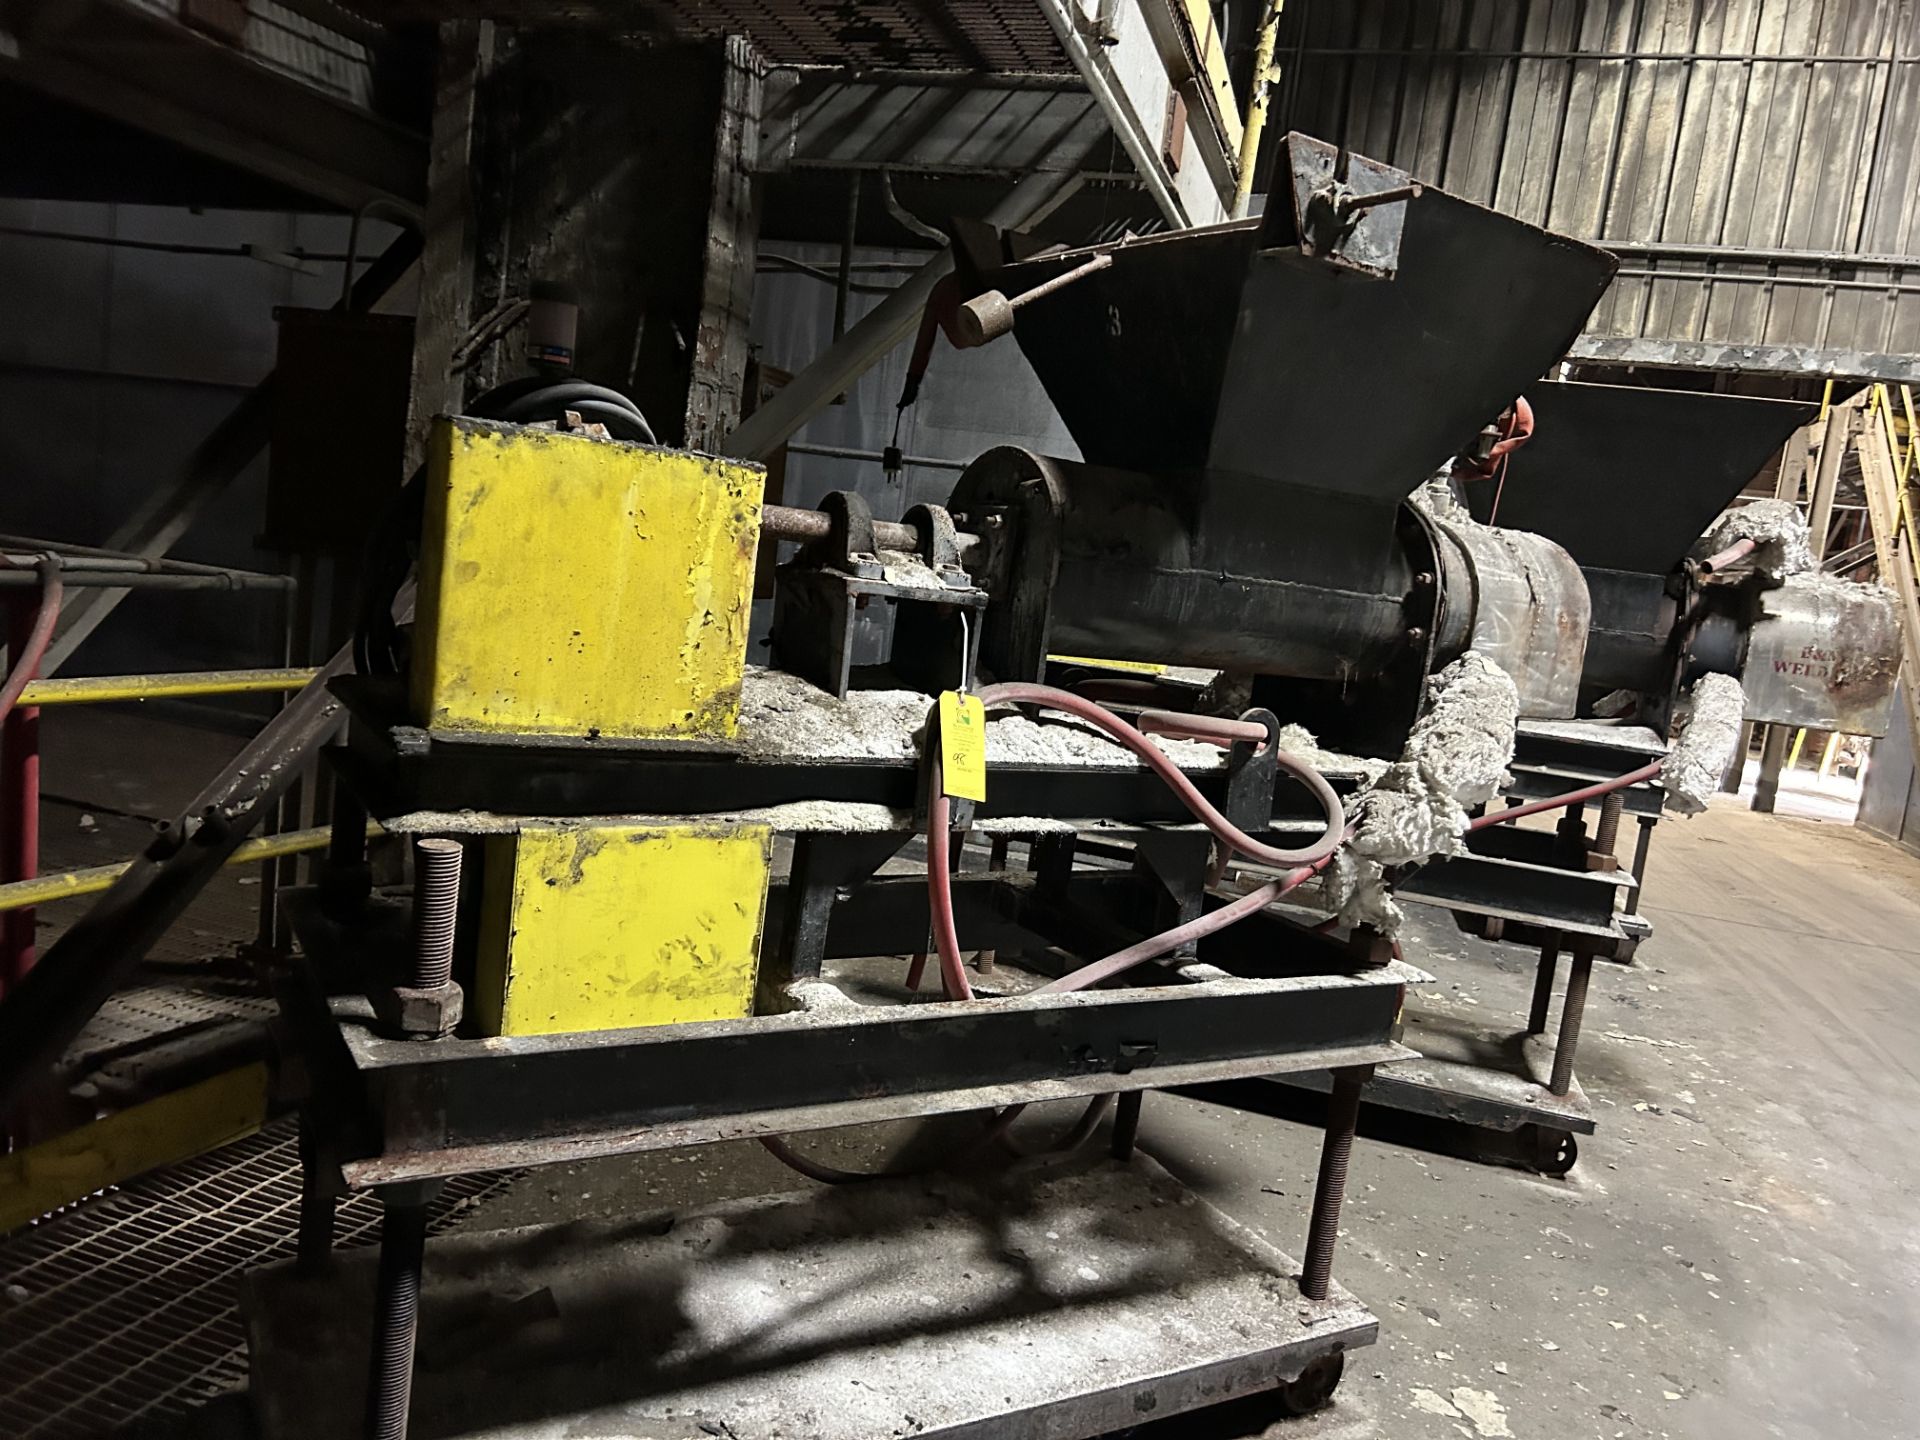 Auger Mixer, Rigging/ Removal Fee - $325 - Image 2 of 4